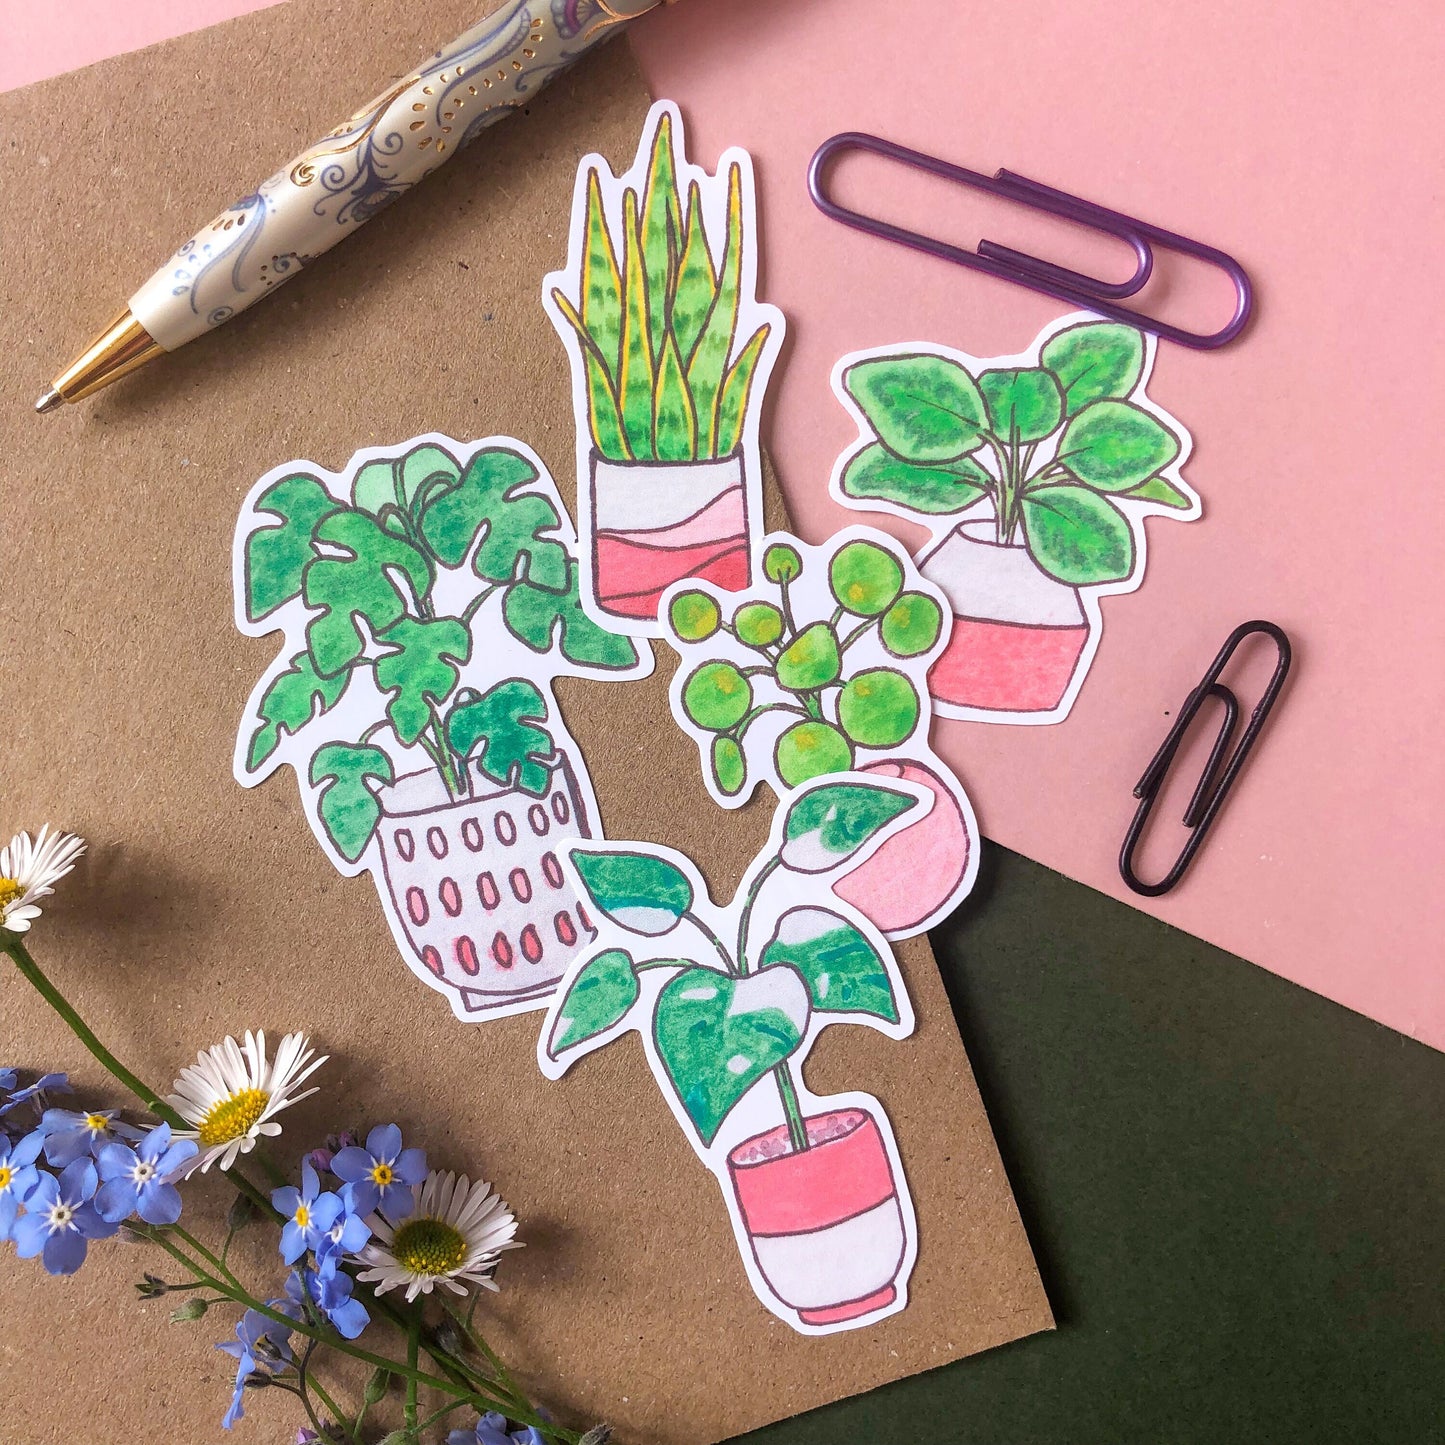 APrint, Notepad & House Plants Sticker Set - A4 Print A3, A6 Memo Pad - Eco Friendly Letterbox Gift for Plant Lover - Plant Stationery Set